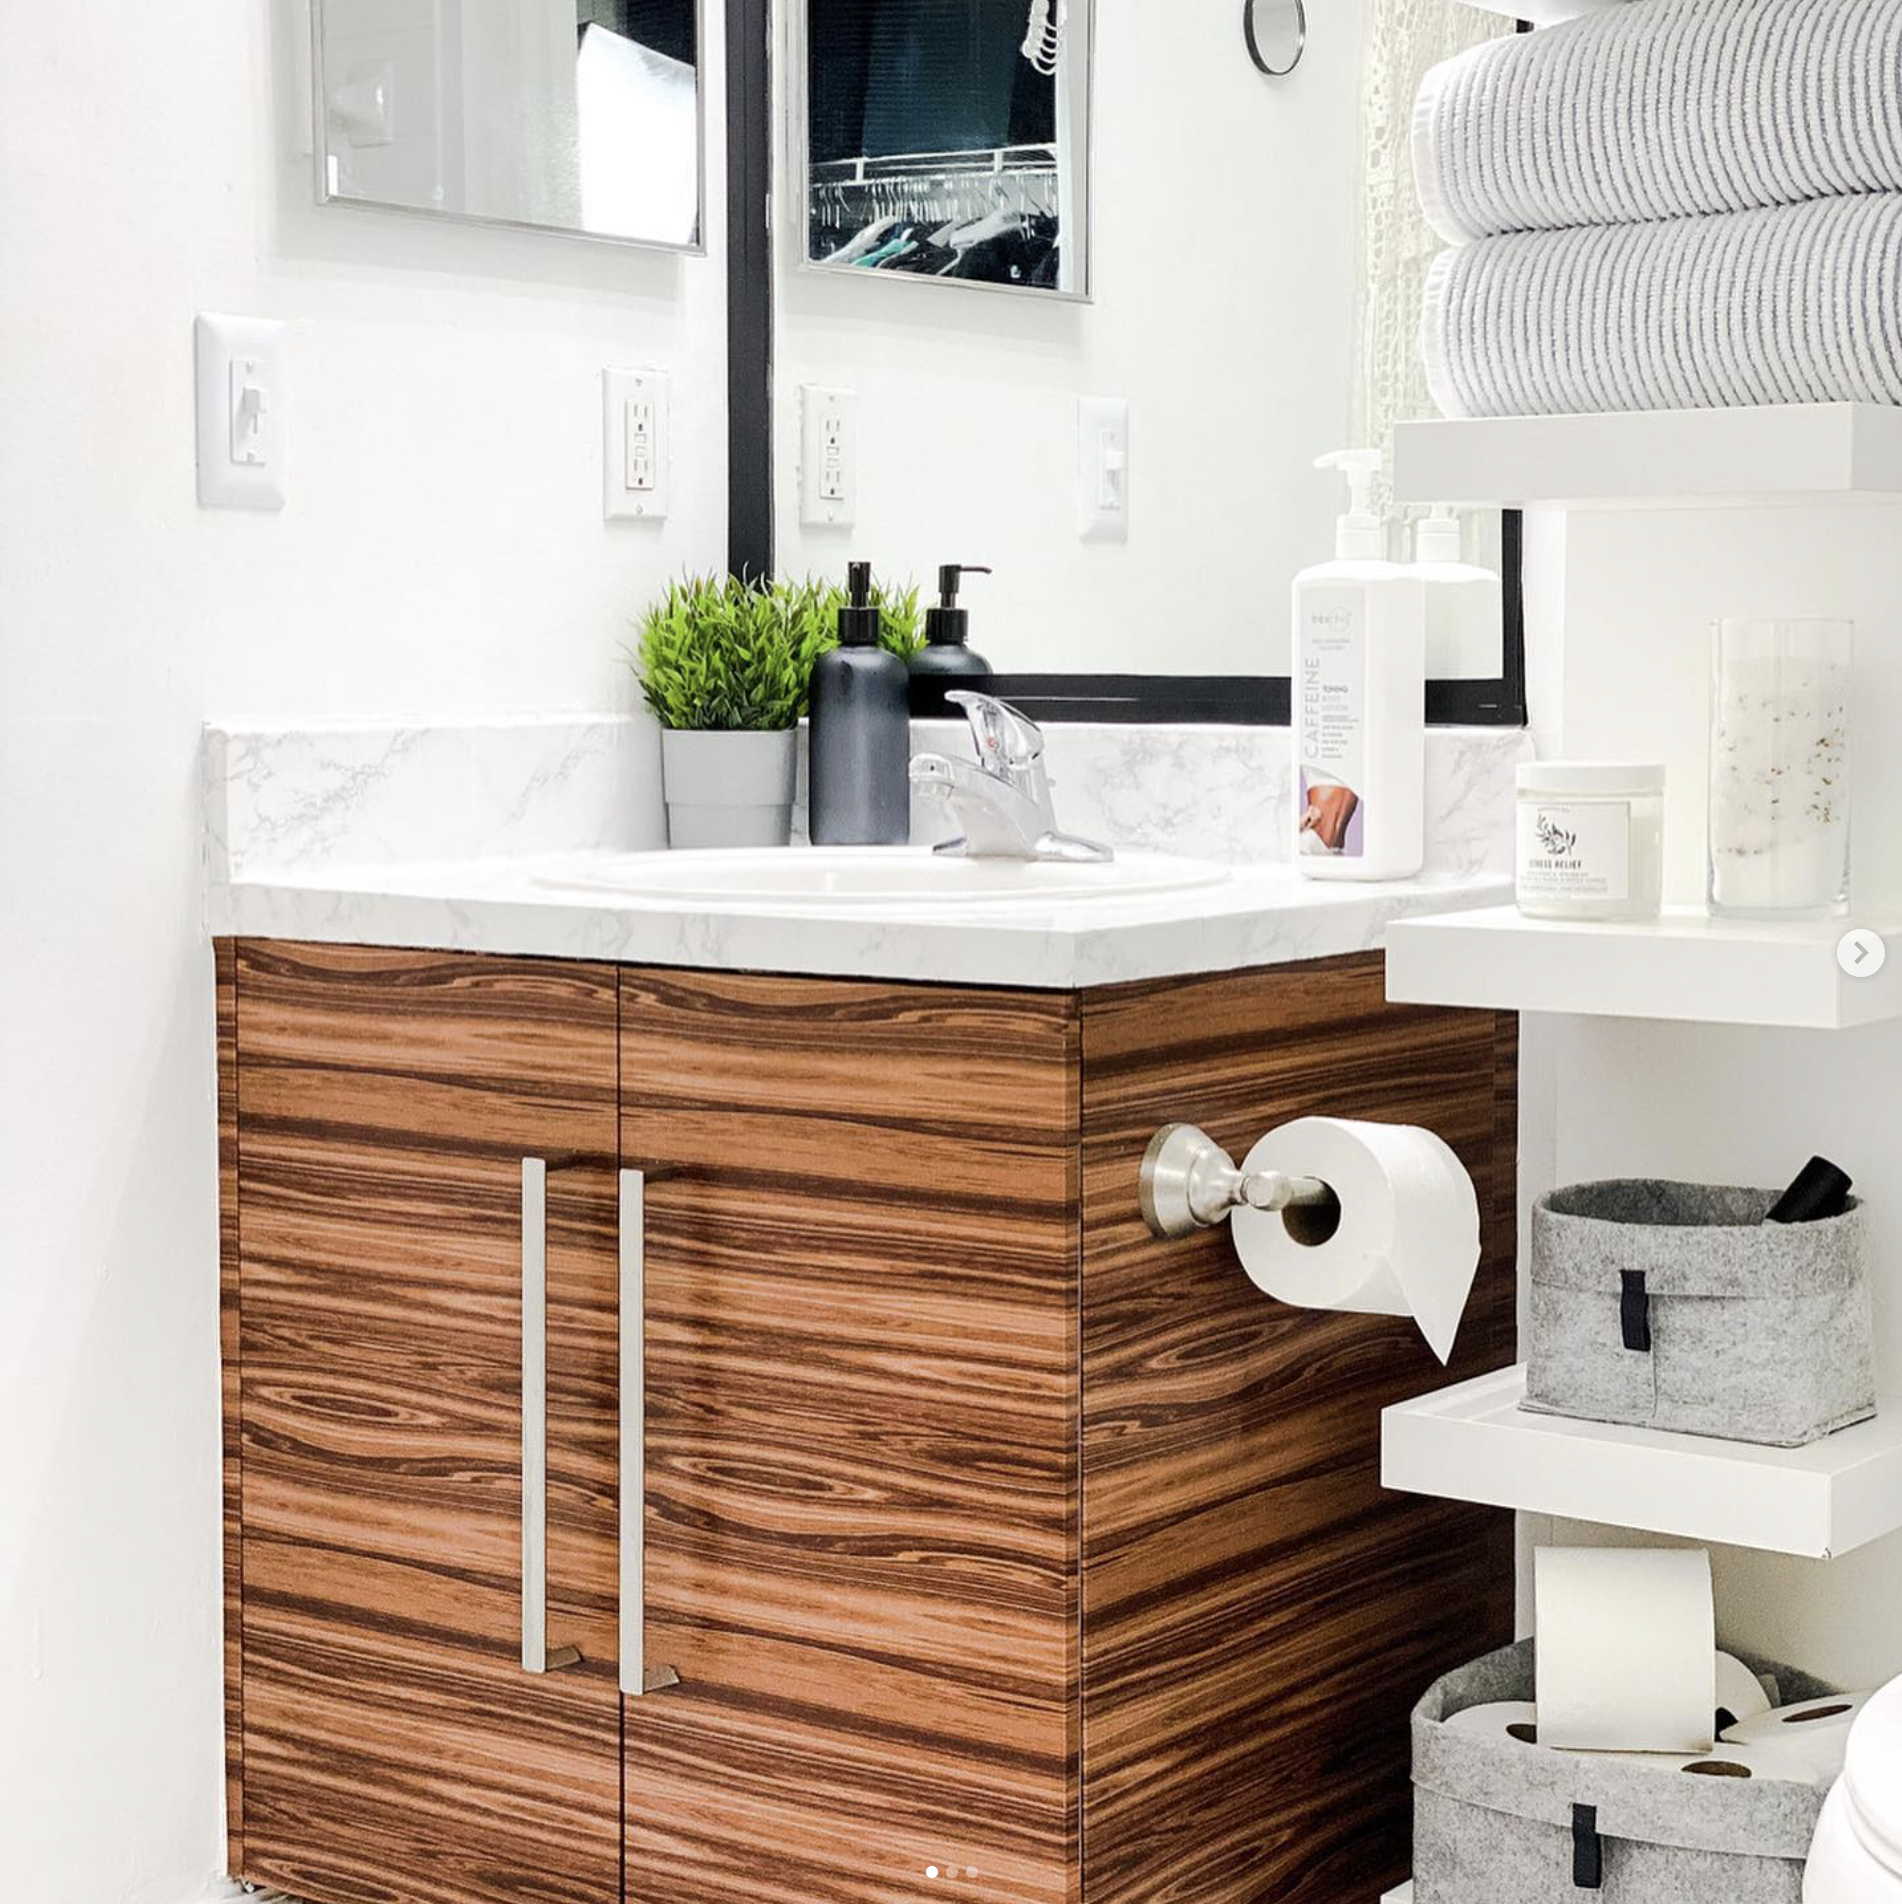 A Renter-Friendly Way to Give Your Bathroom a Rustic Update - A Paper Arrow